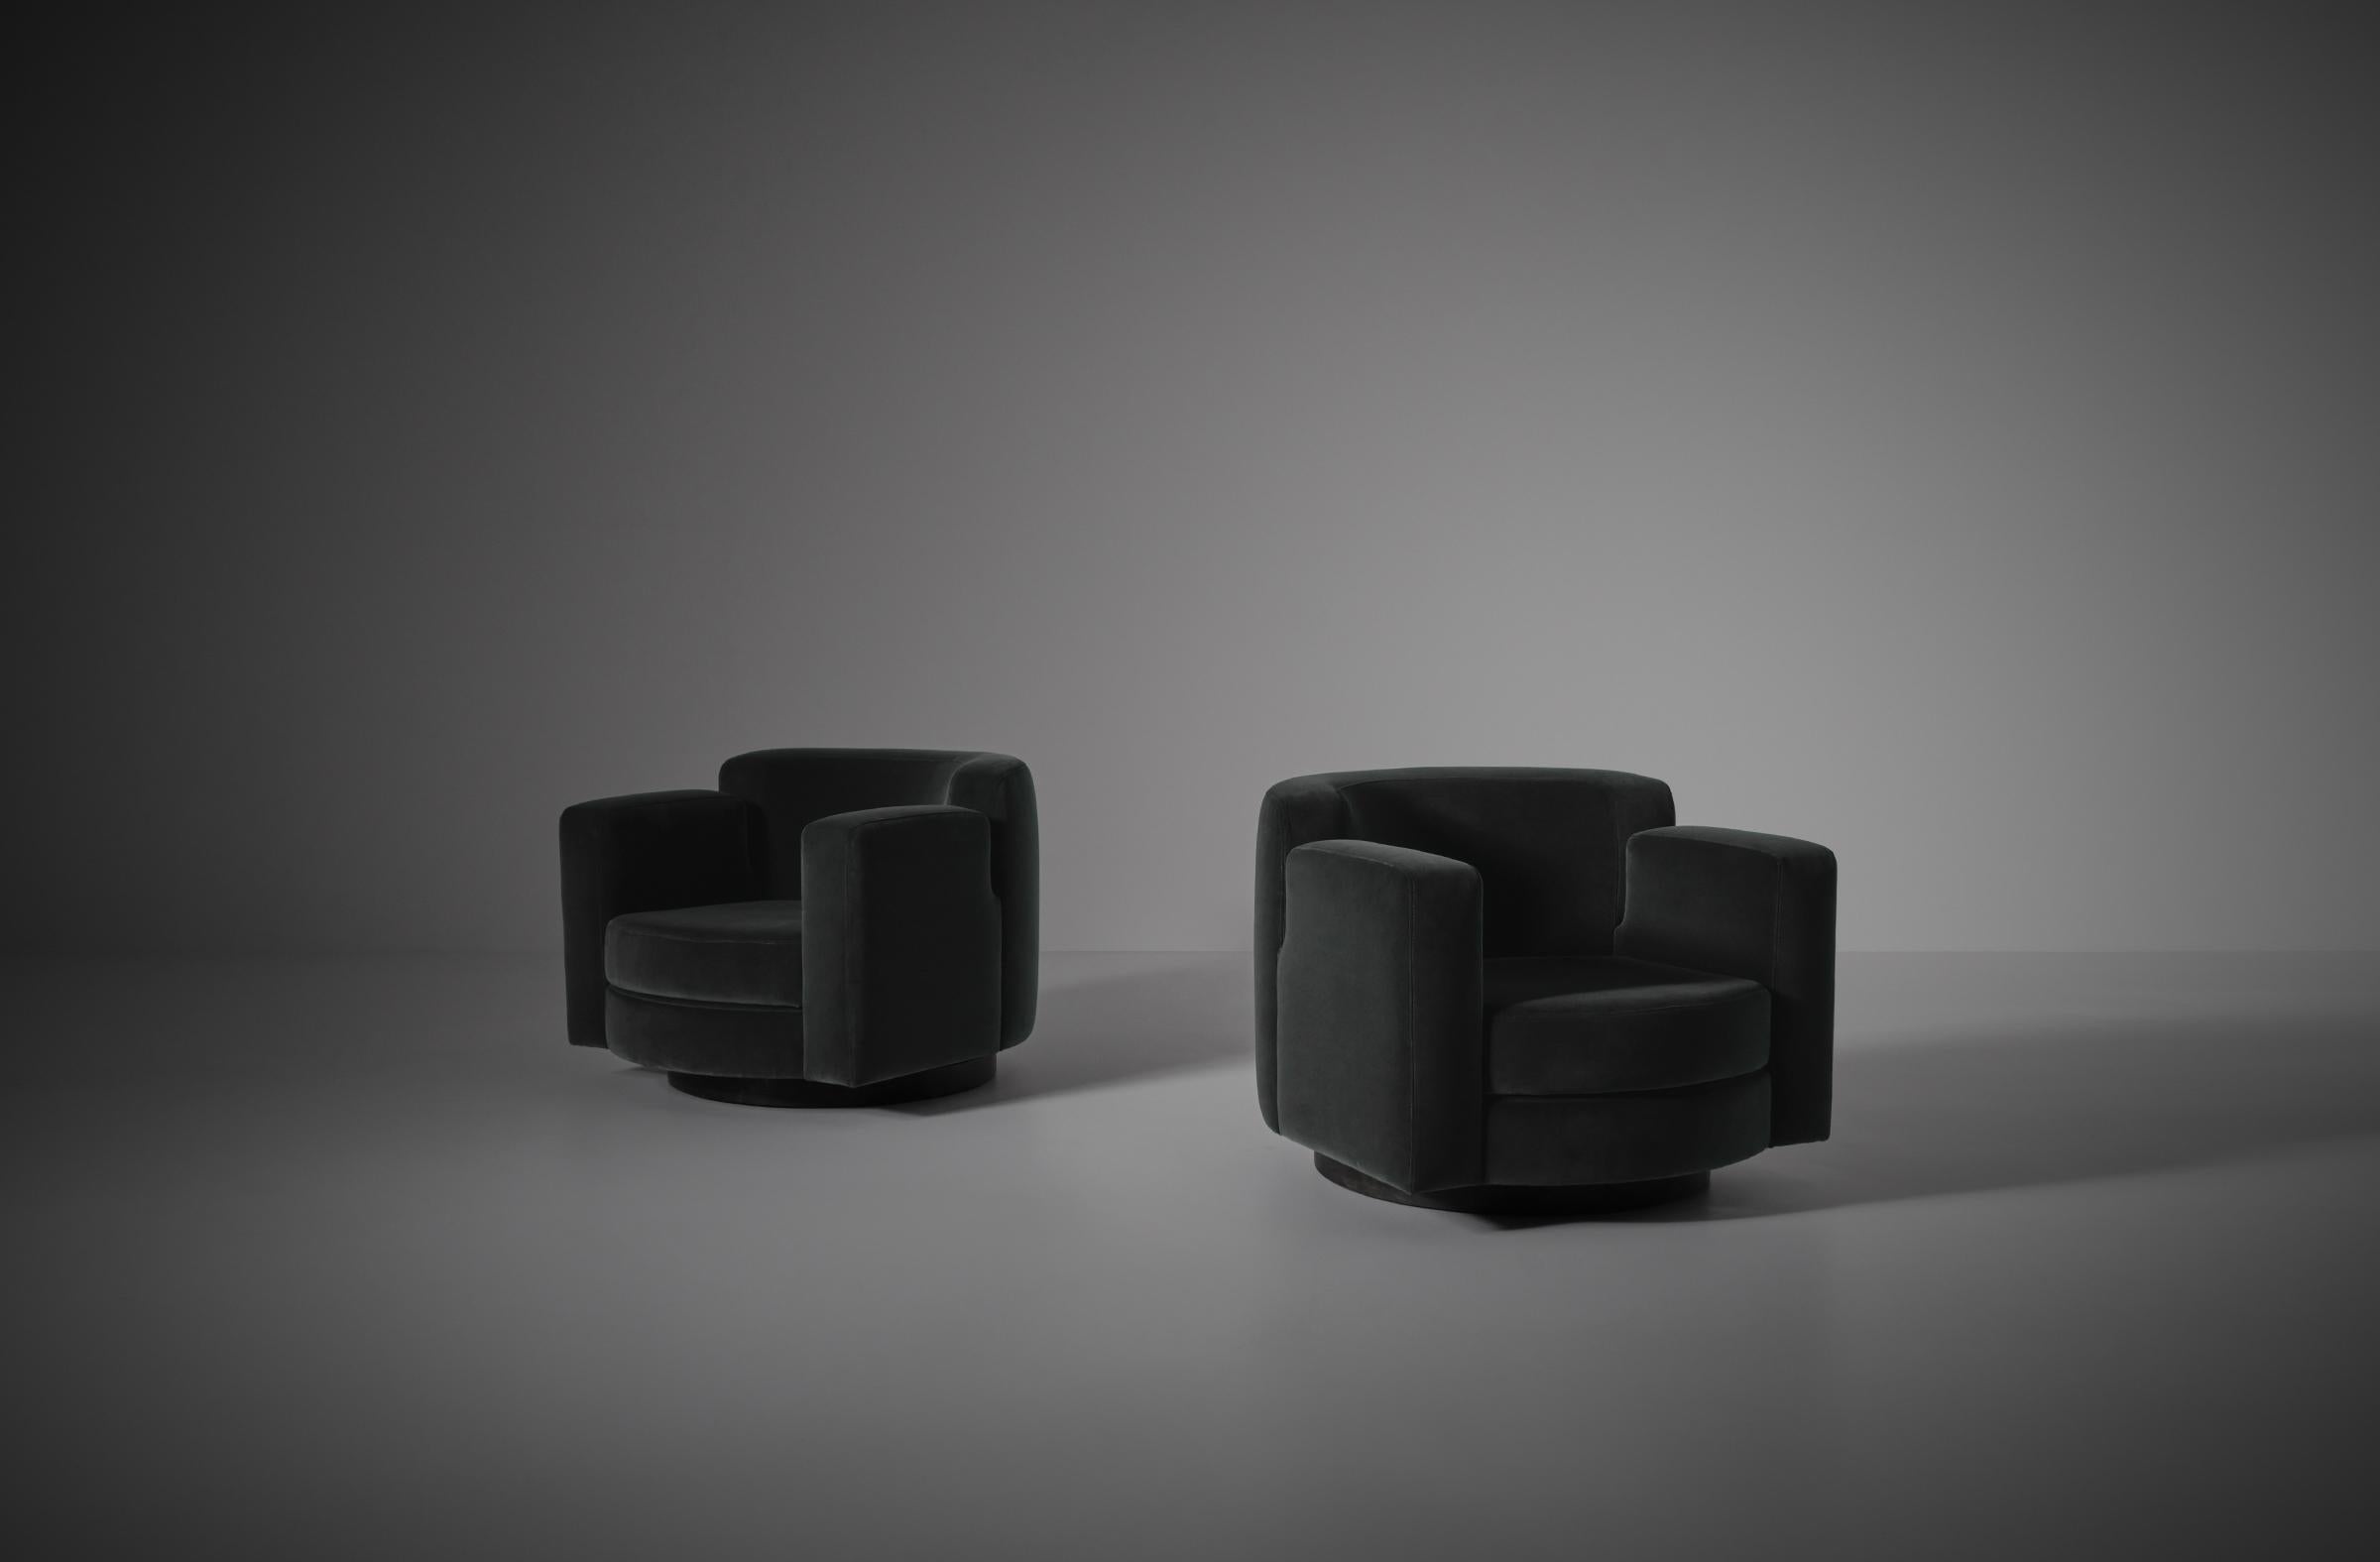 Pair of lounge chairs model ‘Rolly’ by Luciano Frigerio, Italy 1968. The chairs are featured with a round solid stained wooden swivel base and are upholstered in dark grey - greenish velvet.
Very comfortable chairs in good condition.